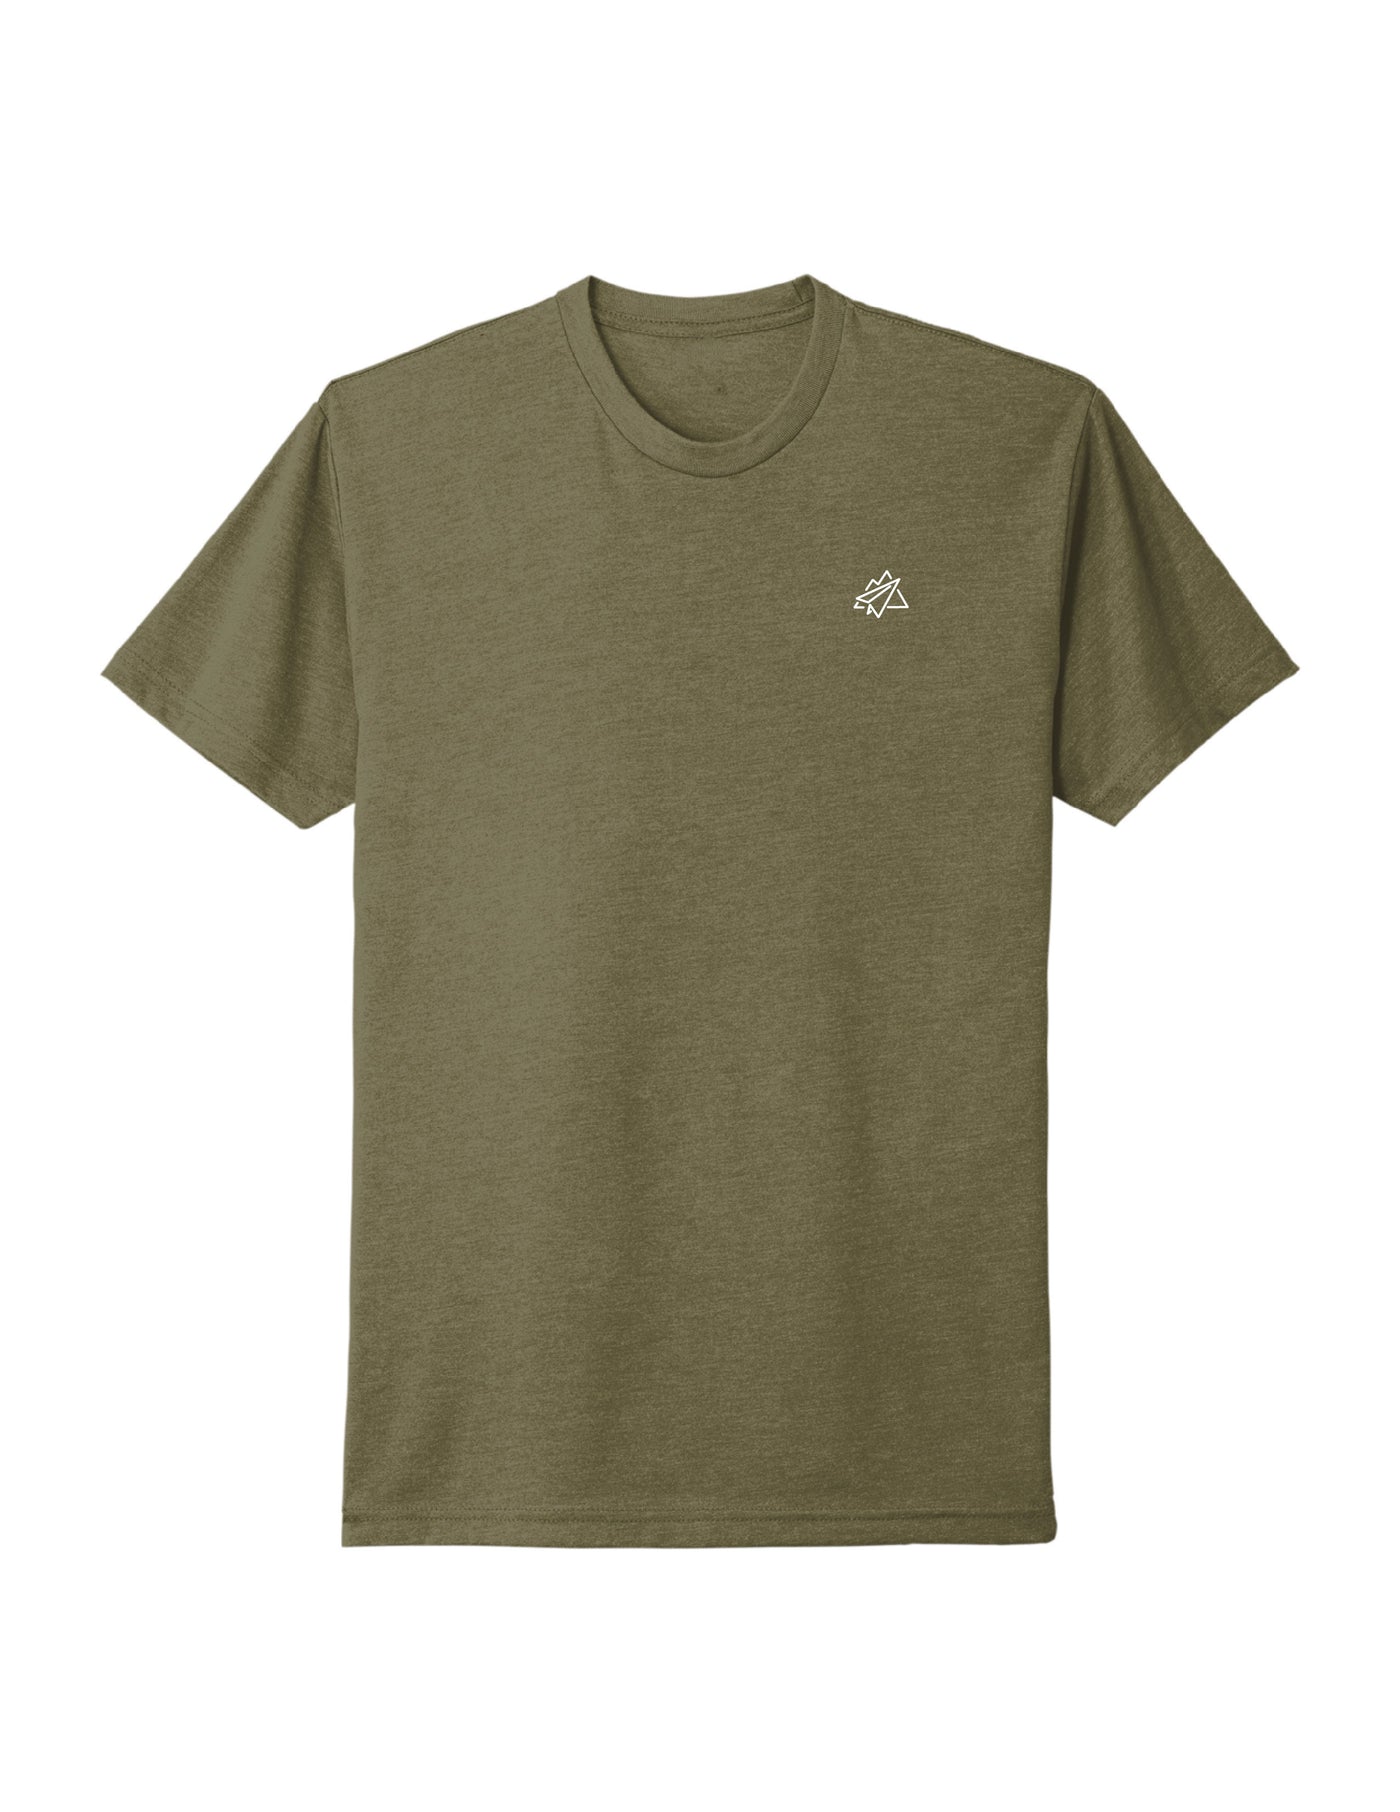 Embroidered Tee - Olive